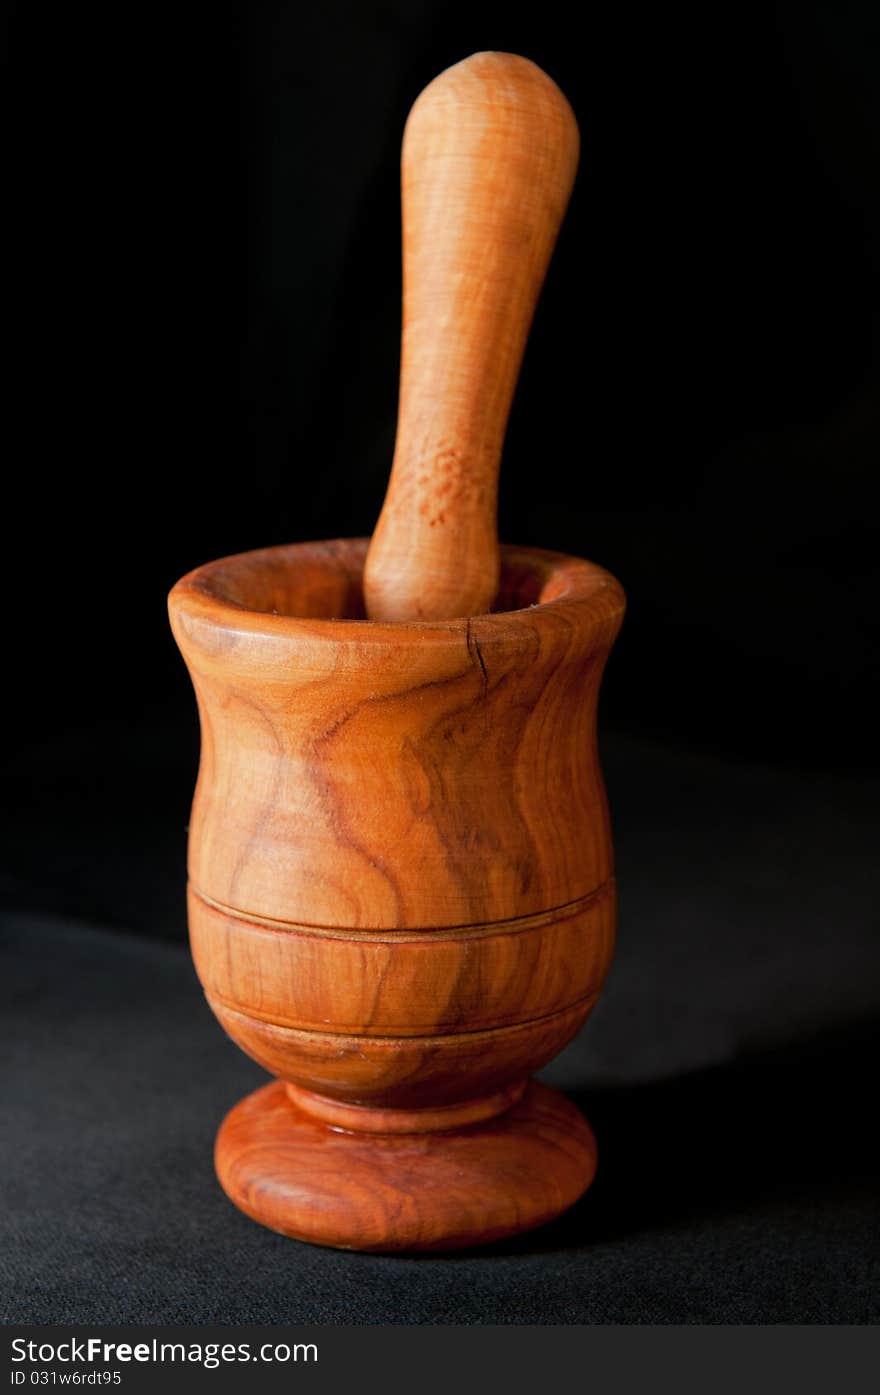 Wooden mortar and a pestle isolated on a black background. Wooden mortar and a pestle isolated on a black background.